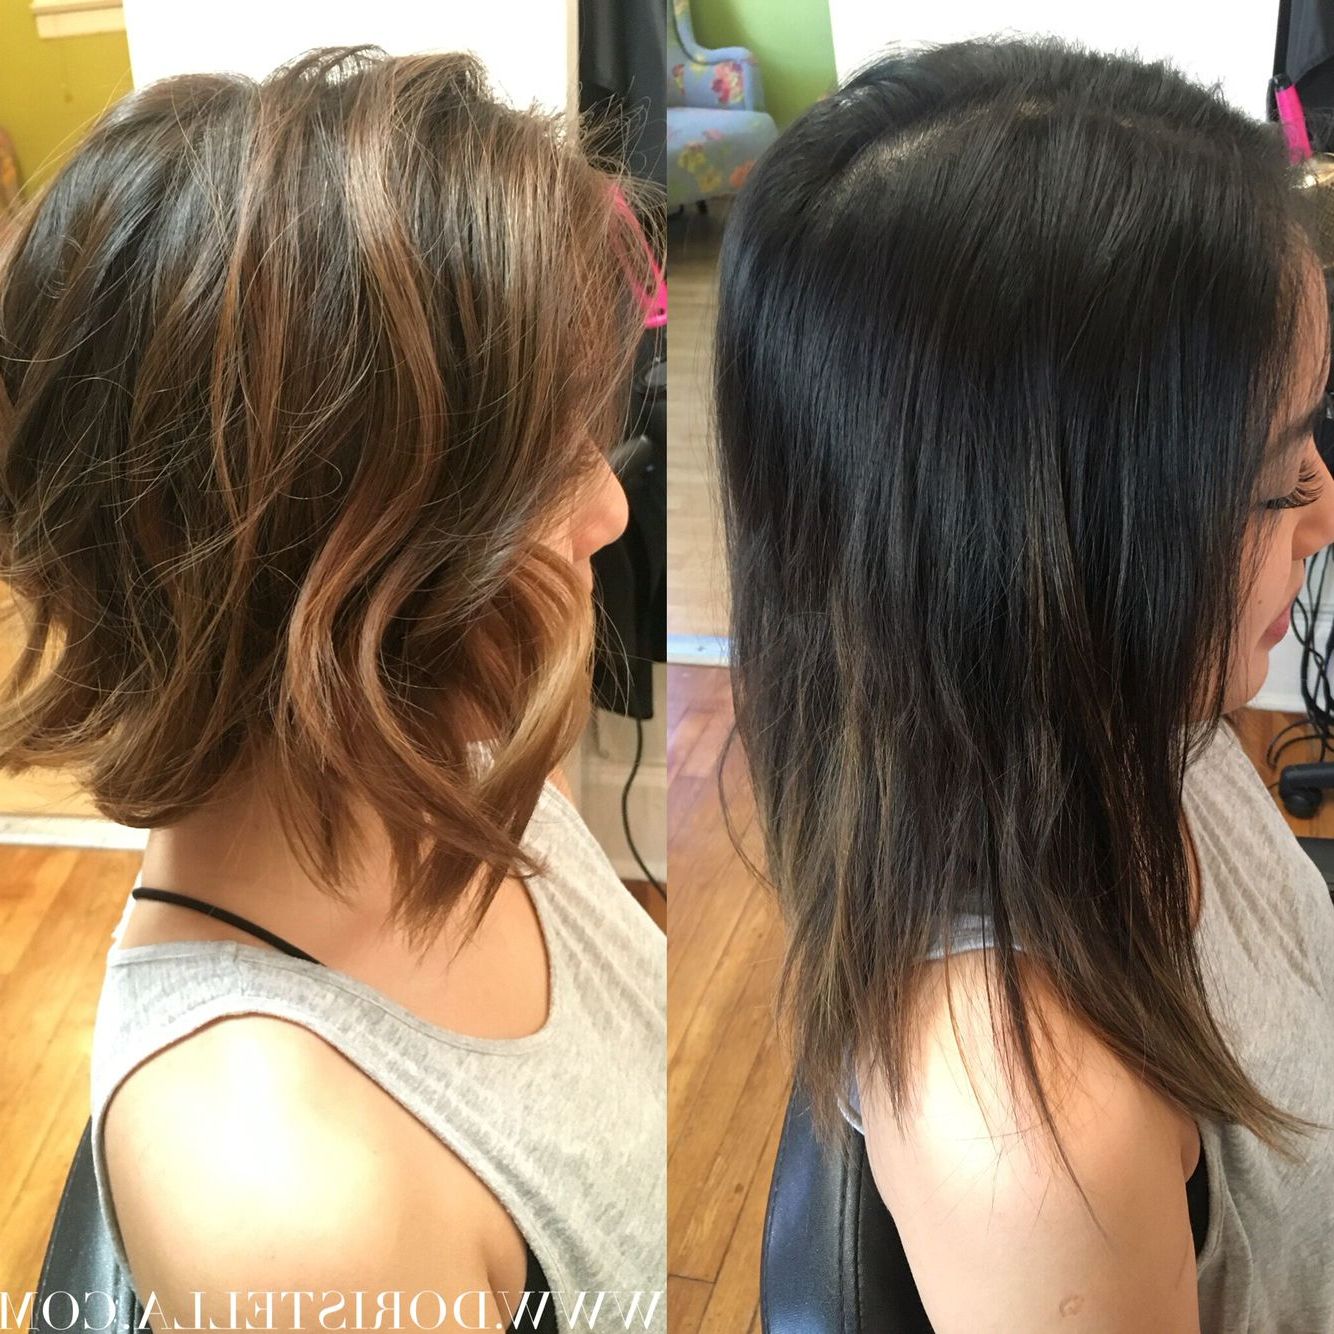 Before & After On My Asian Beauty! Bronde! Balayage In Trendy Asian Medium Hairstyles With Textured Waves (View 6 of 20)